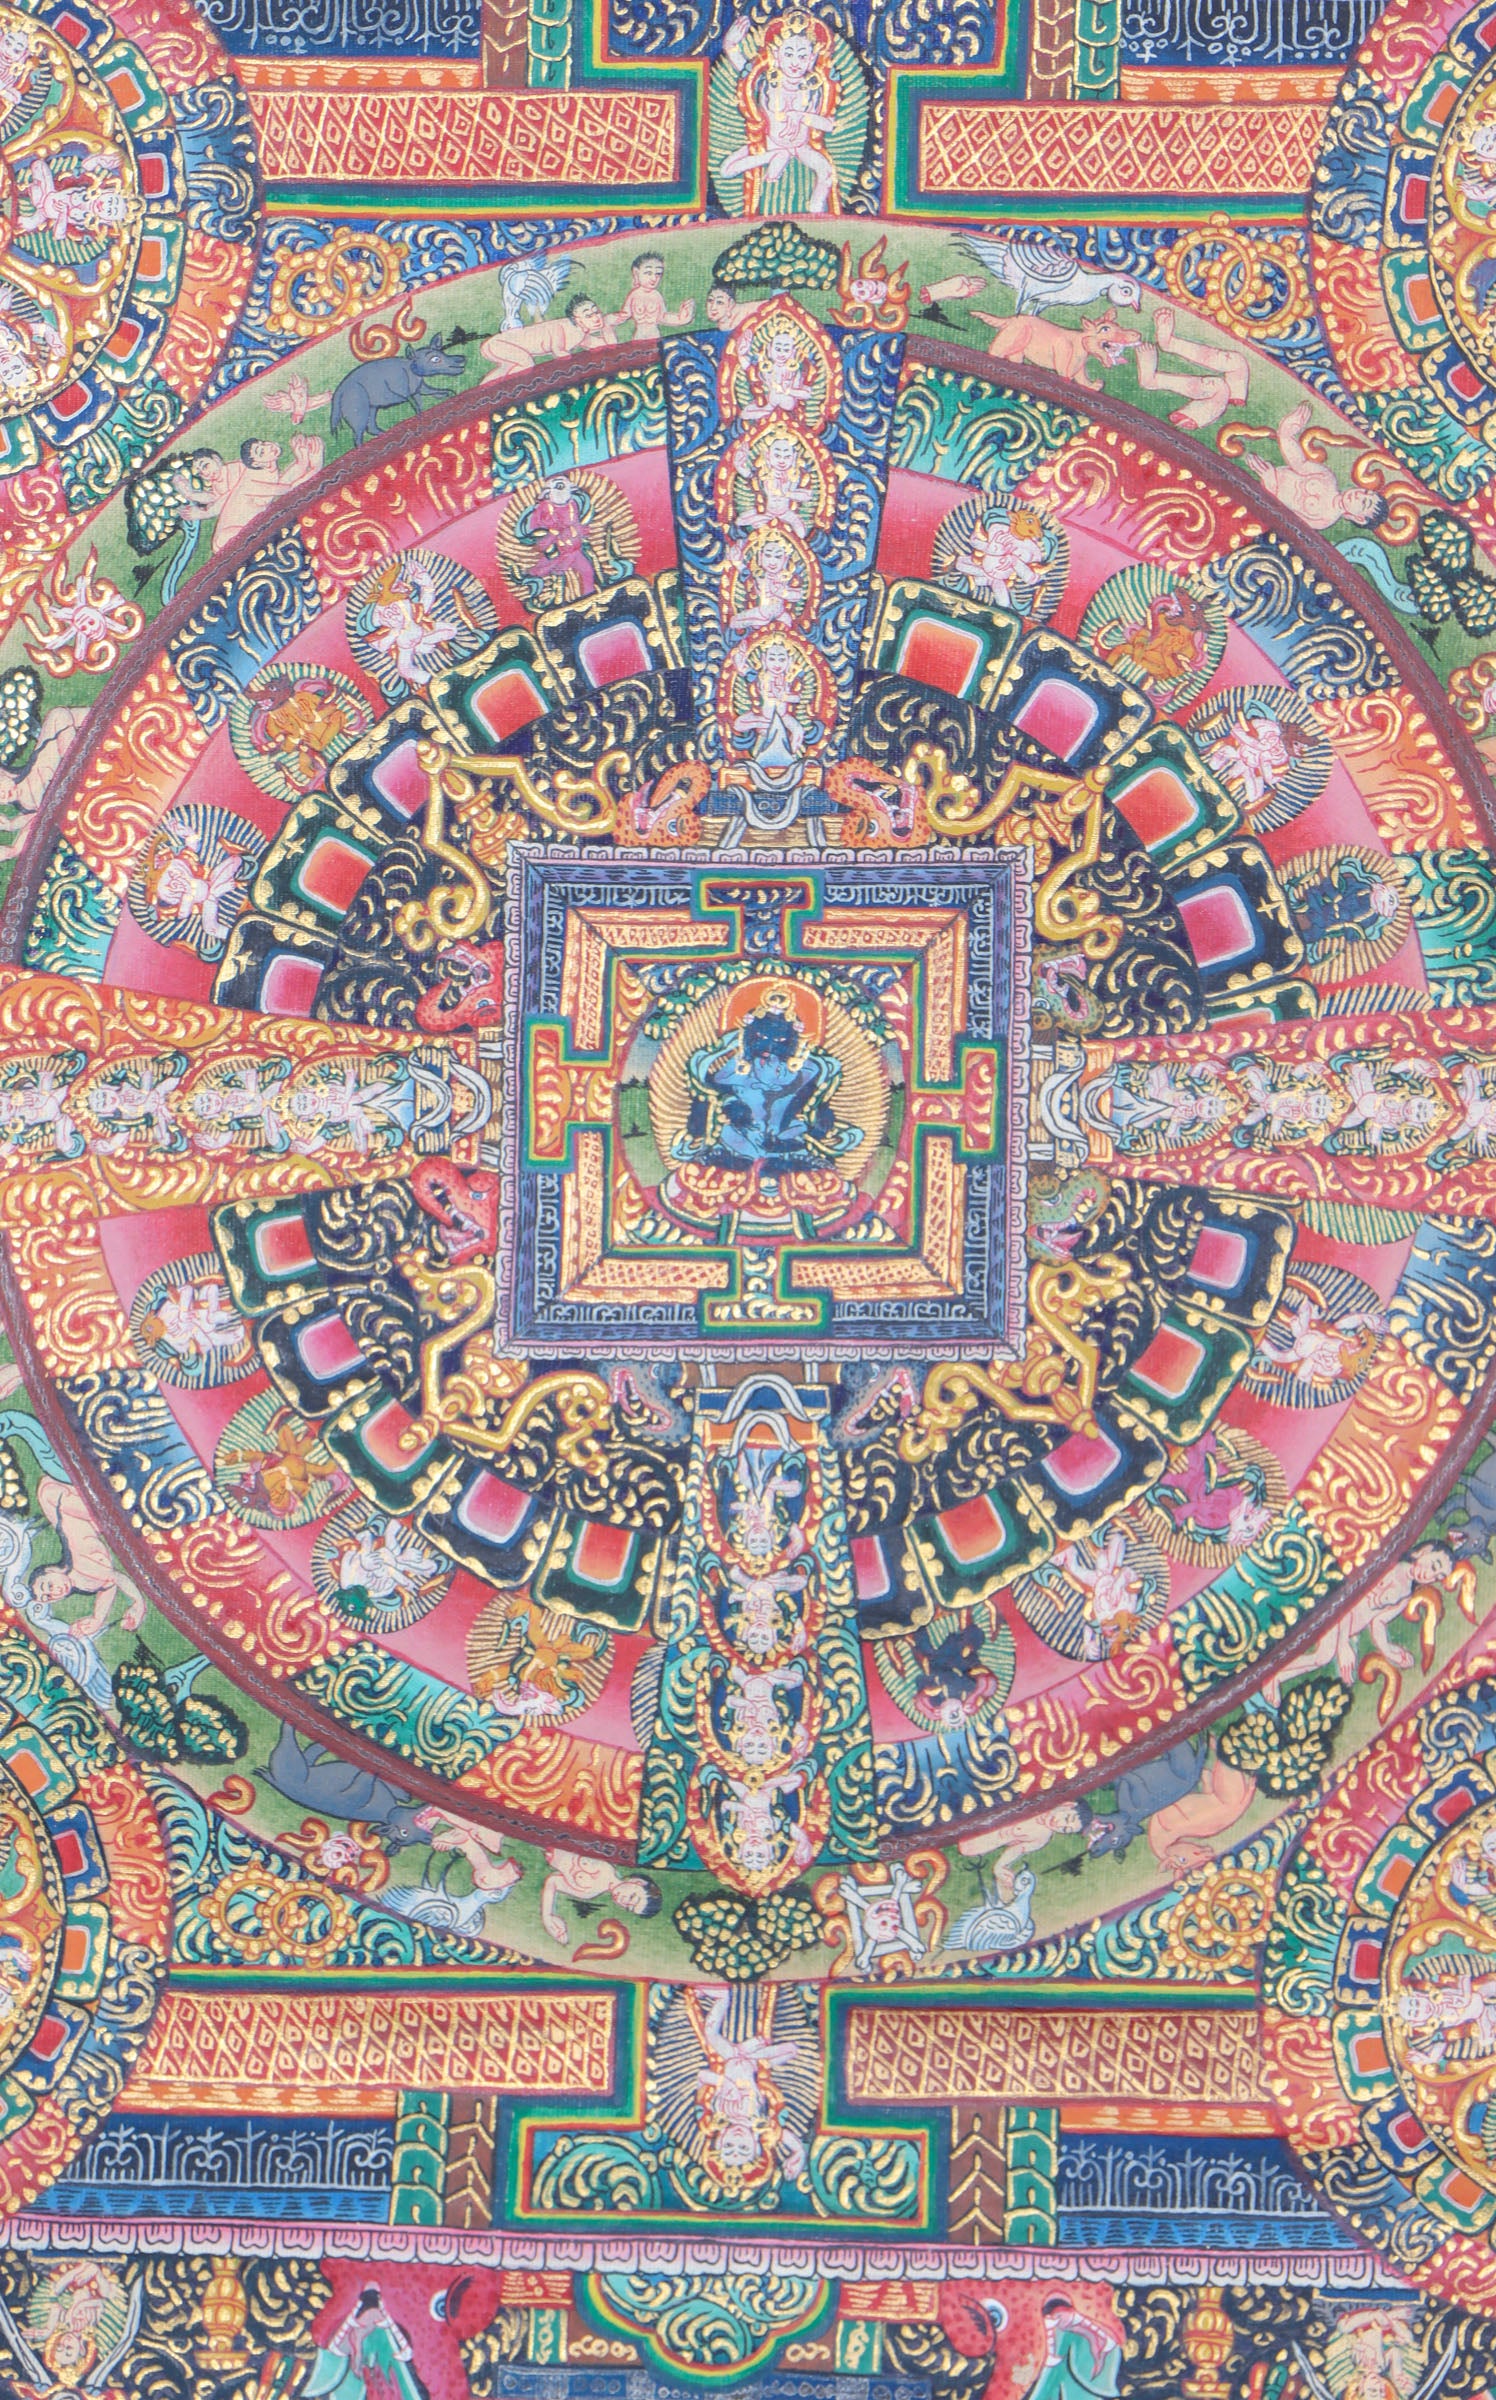  Vajradhara Mandala Thangka assists with meditation, contemplation, and the pursuit of wisdom and compassion. 